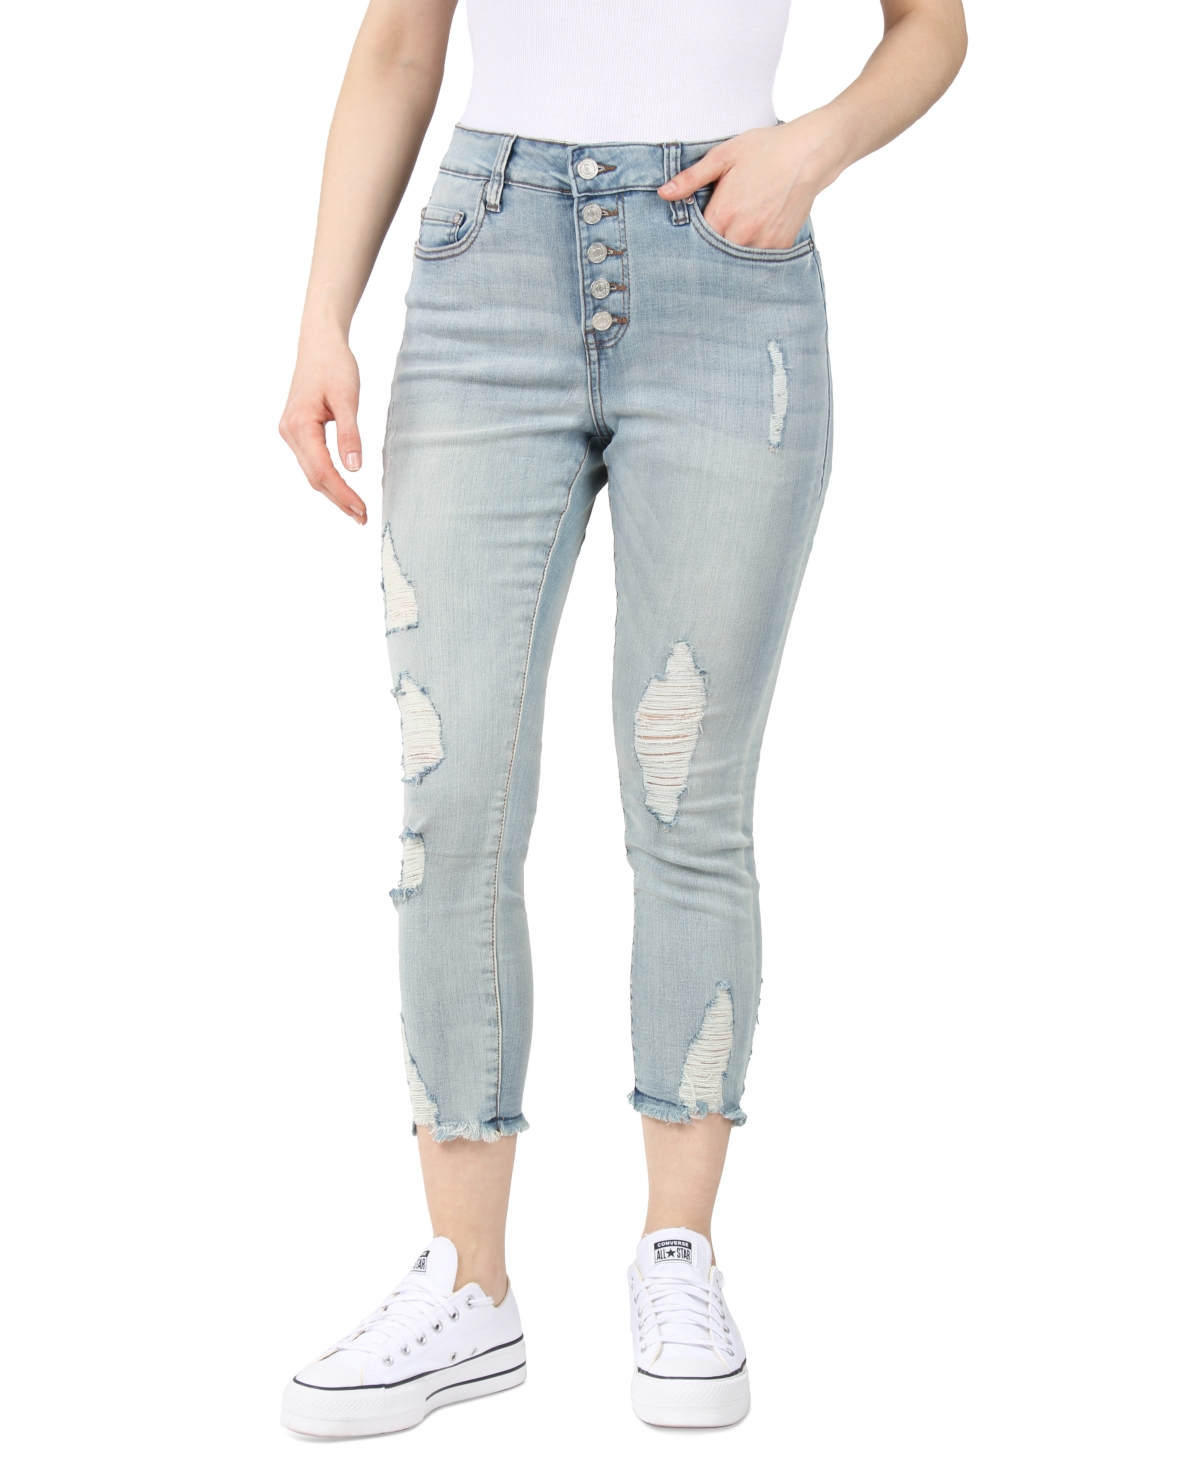 Juniors' Distressed Cropped Jeans - Med Blue